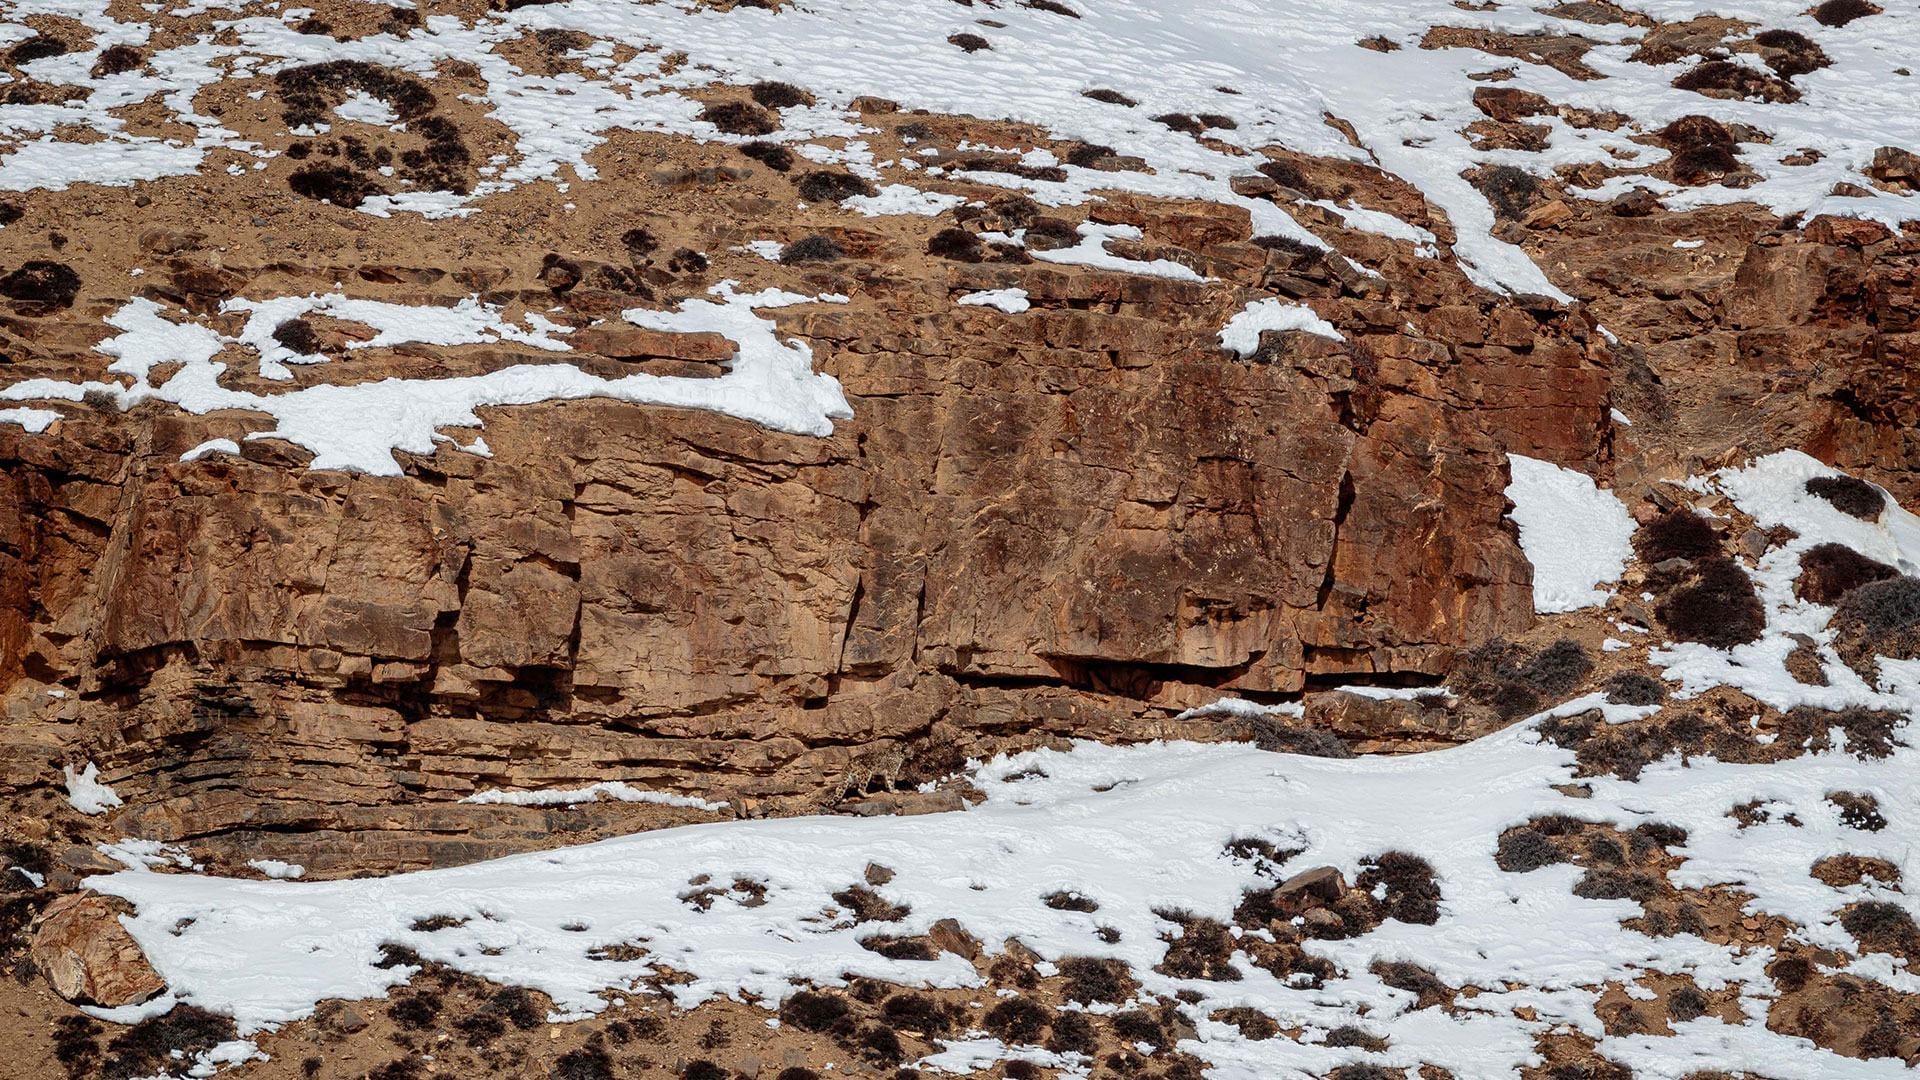 You have an eagle’s eyes if you can spot the snow leopard hiding in the mountains